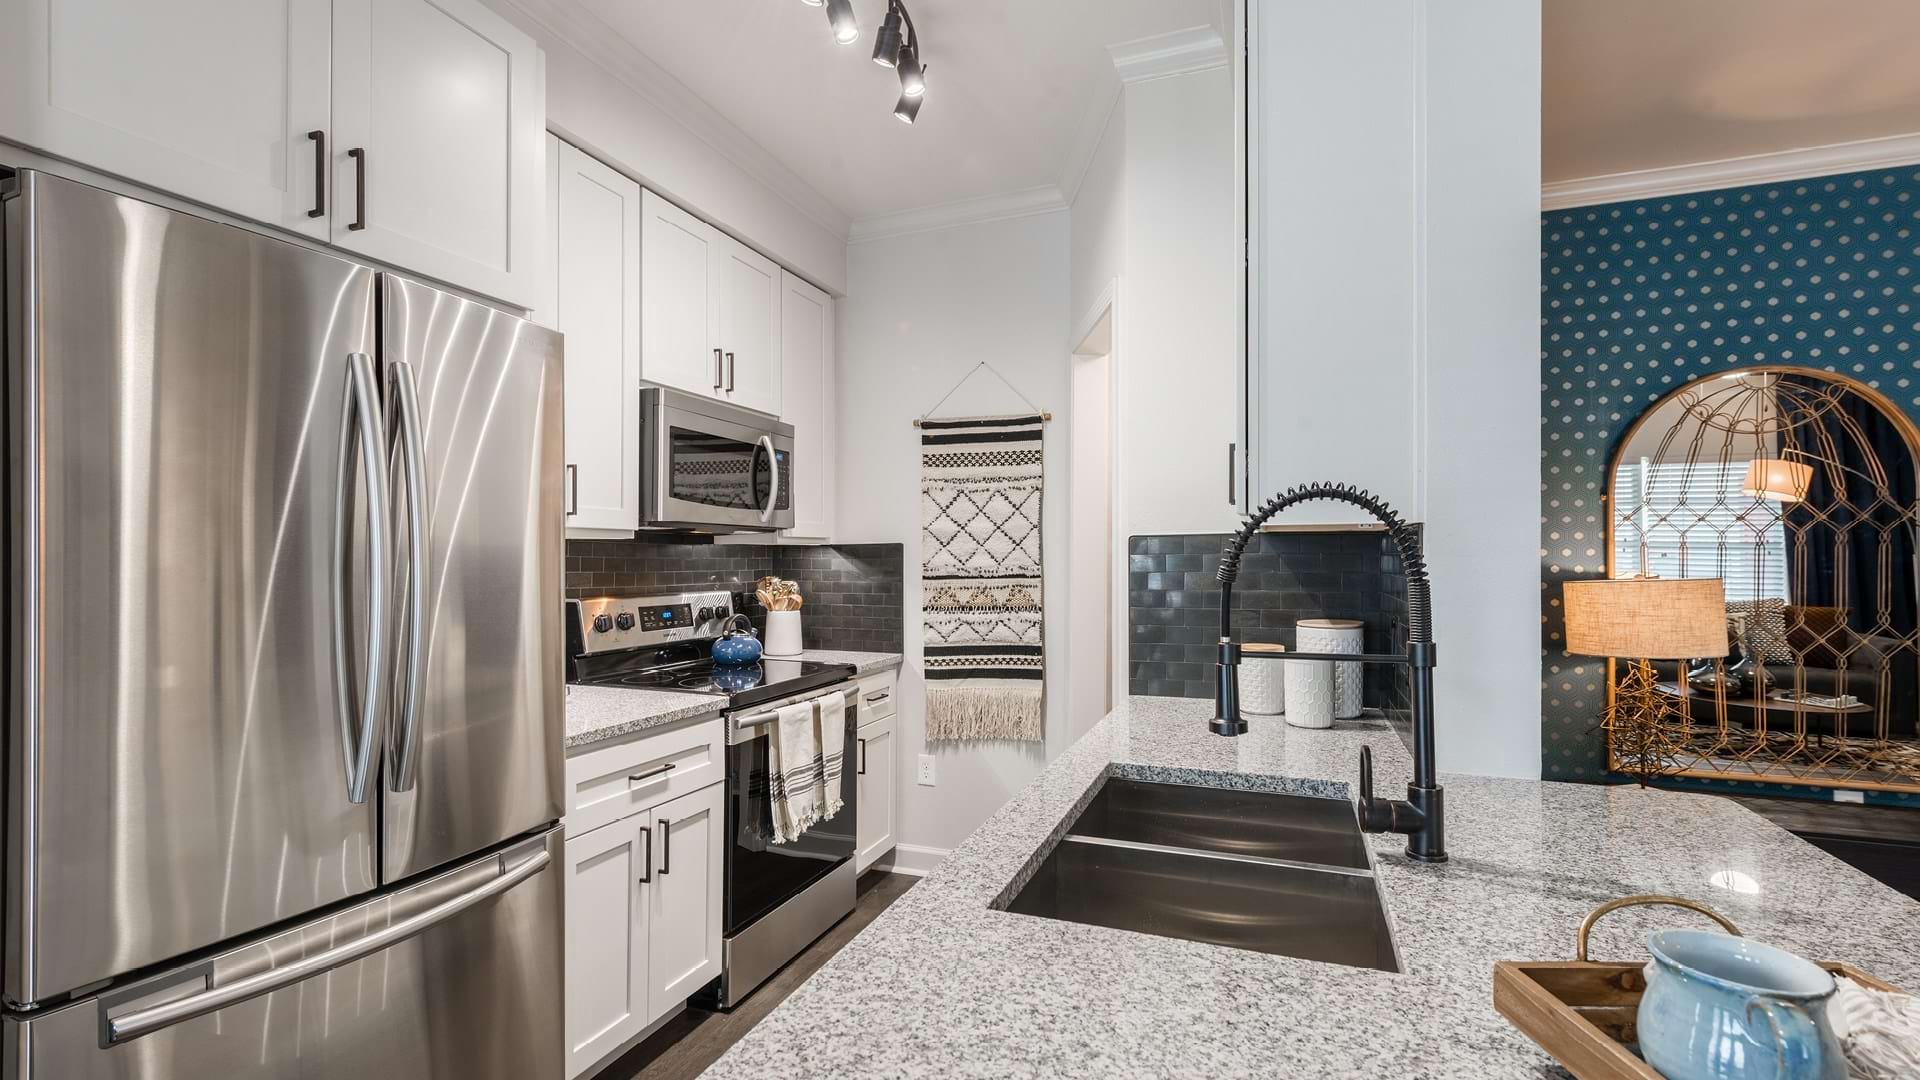 Kitchen with sleek granite countertops and energy-efficient appliances at our modern apartments for rent in Cypress, TX